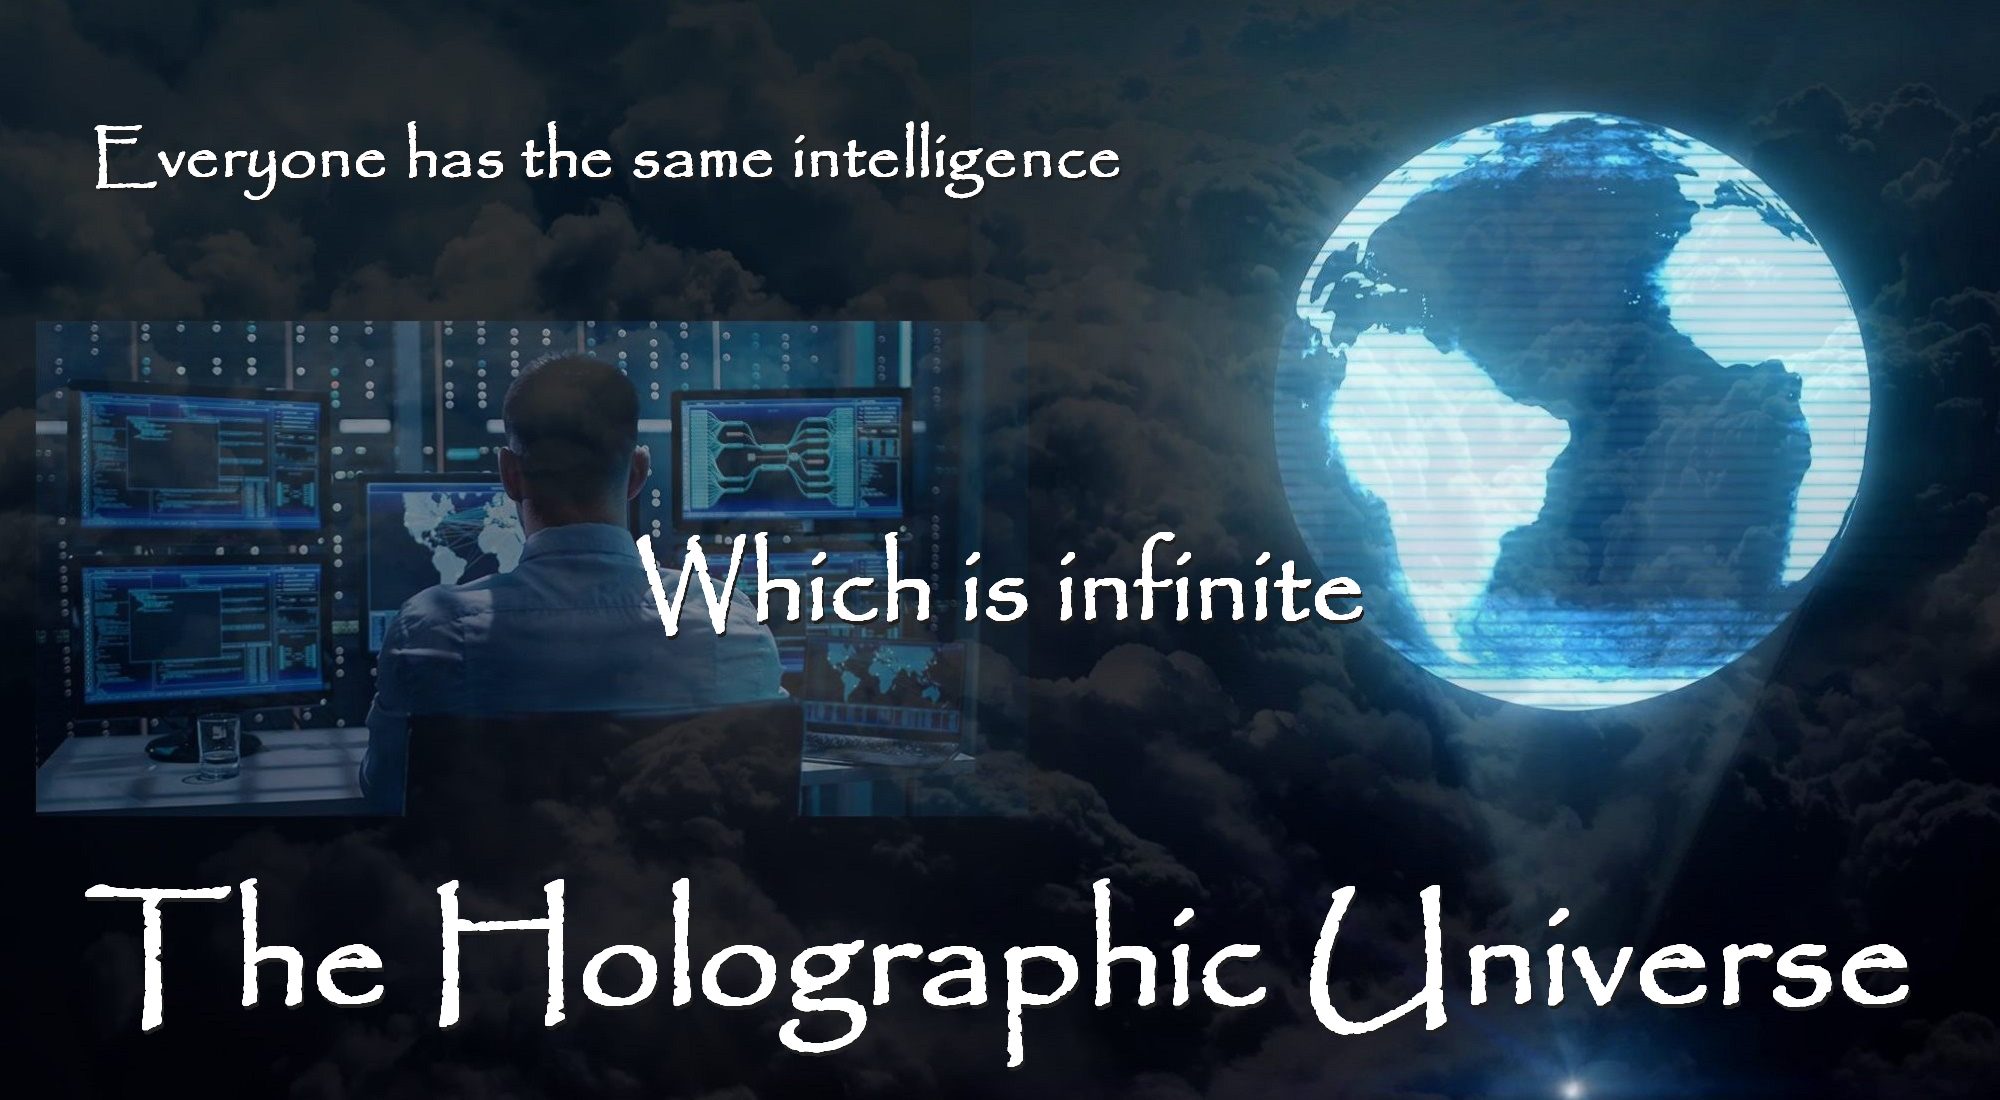 Holographic reality is explained by William Eastwood books